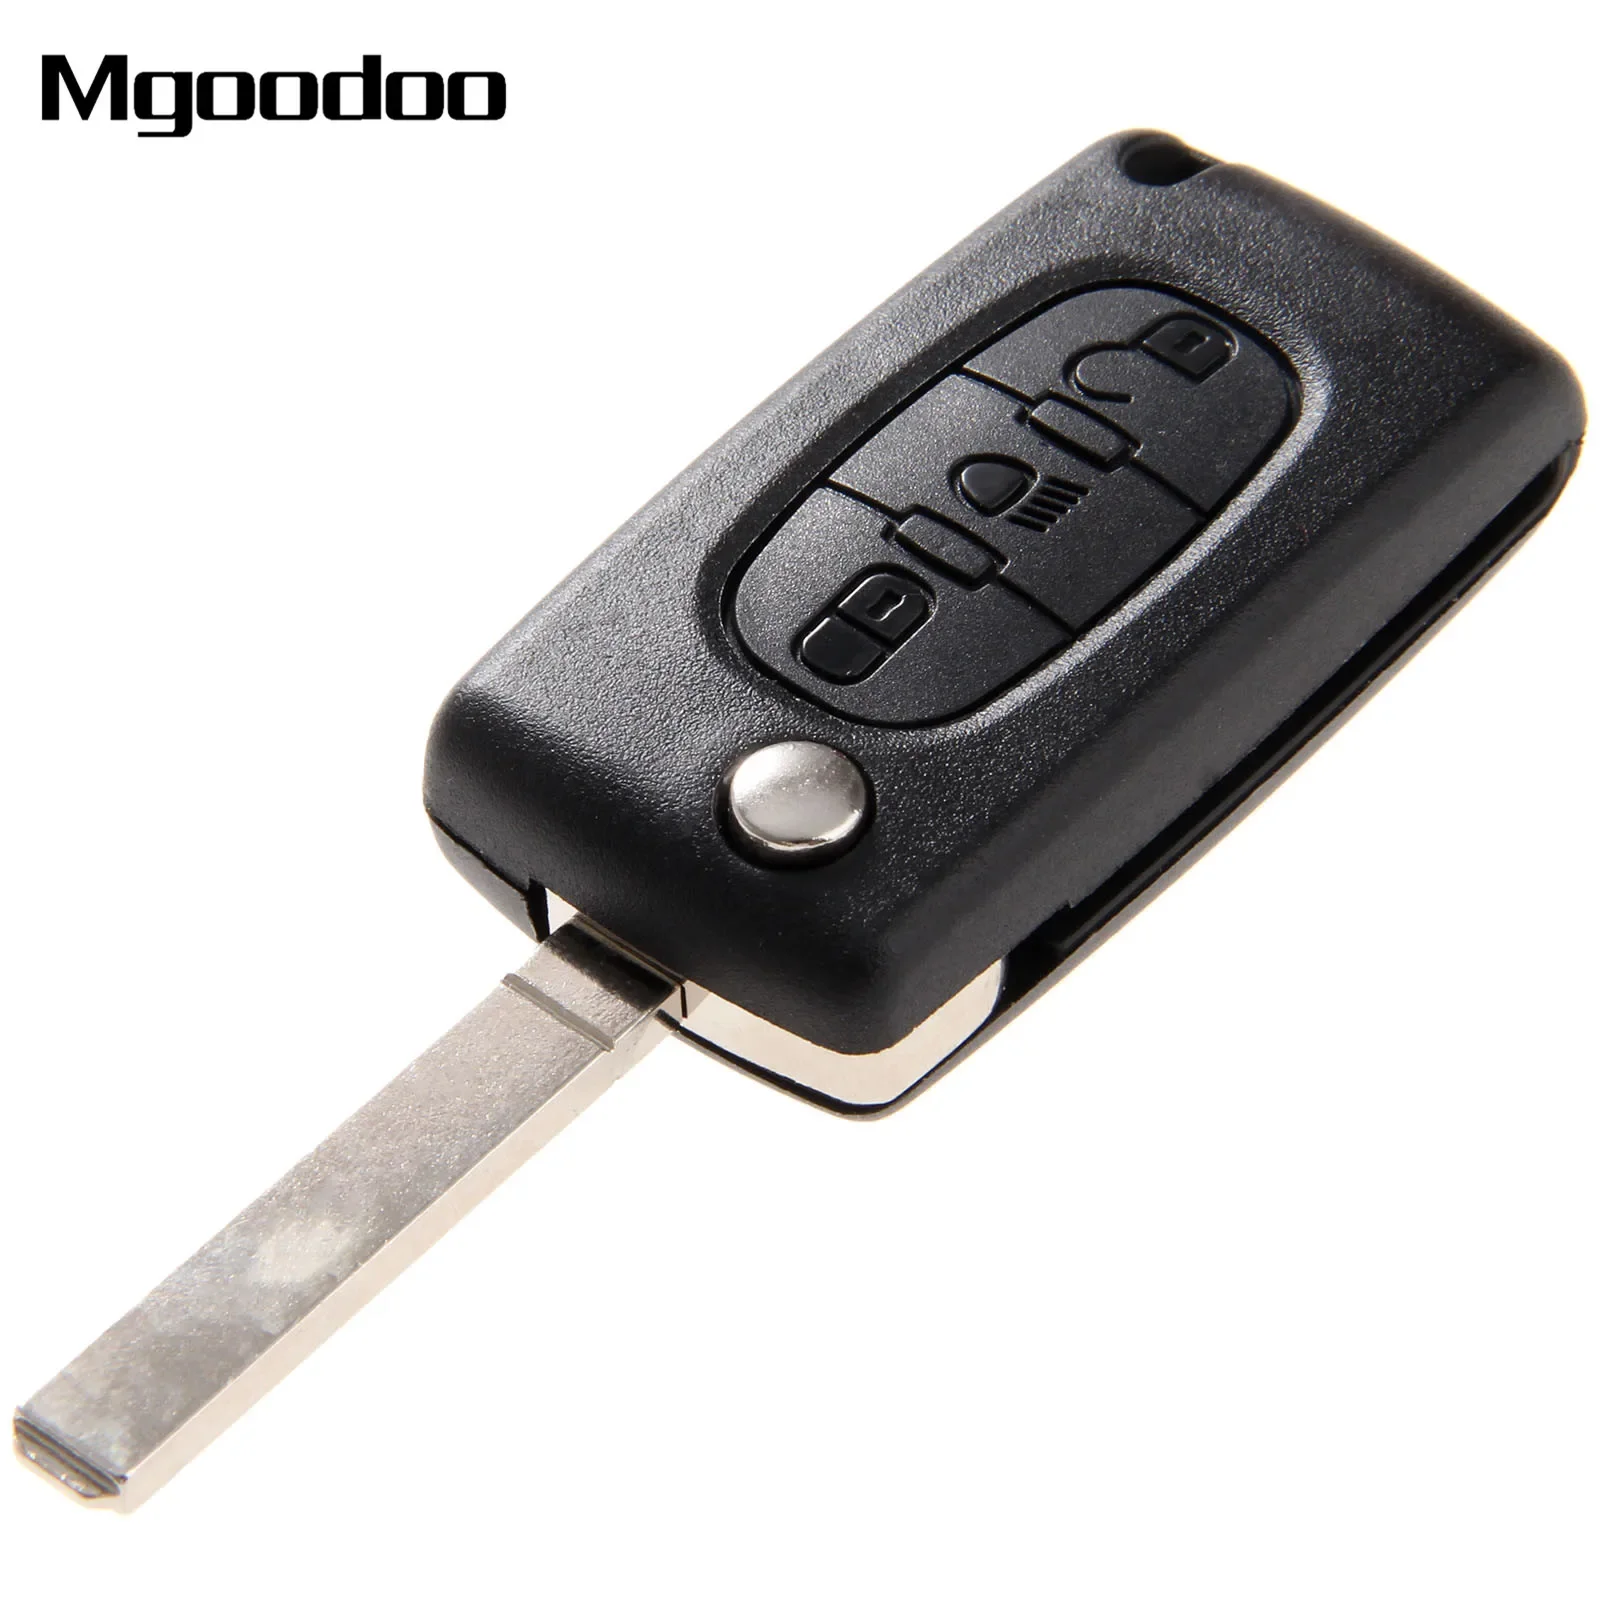 Mgoodoo Remote Key Shell Fob Replacement Case 3 Buttons Flip Folding For Citroen C4 C5 C6 C8 Uncut Blade Flip Key Protect Covers